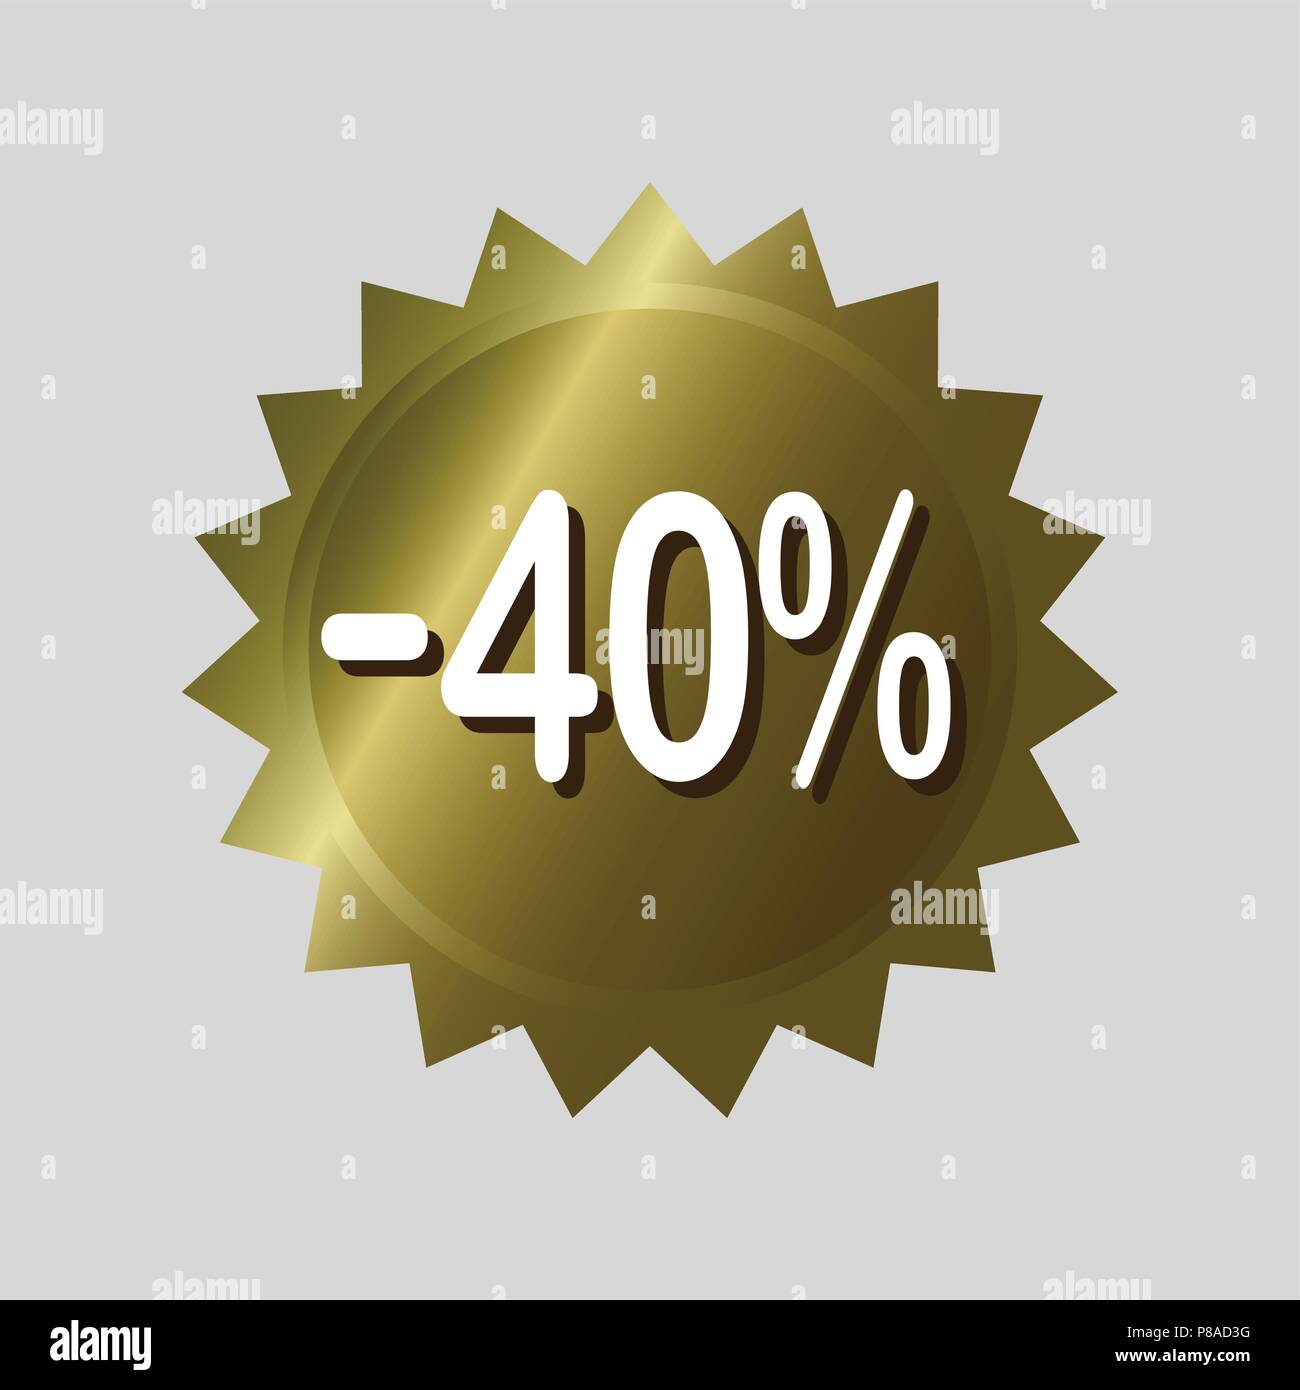 Price tag, '40% off' discount sticker. Golden vector label design on isolated background. Stock Vector